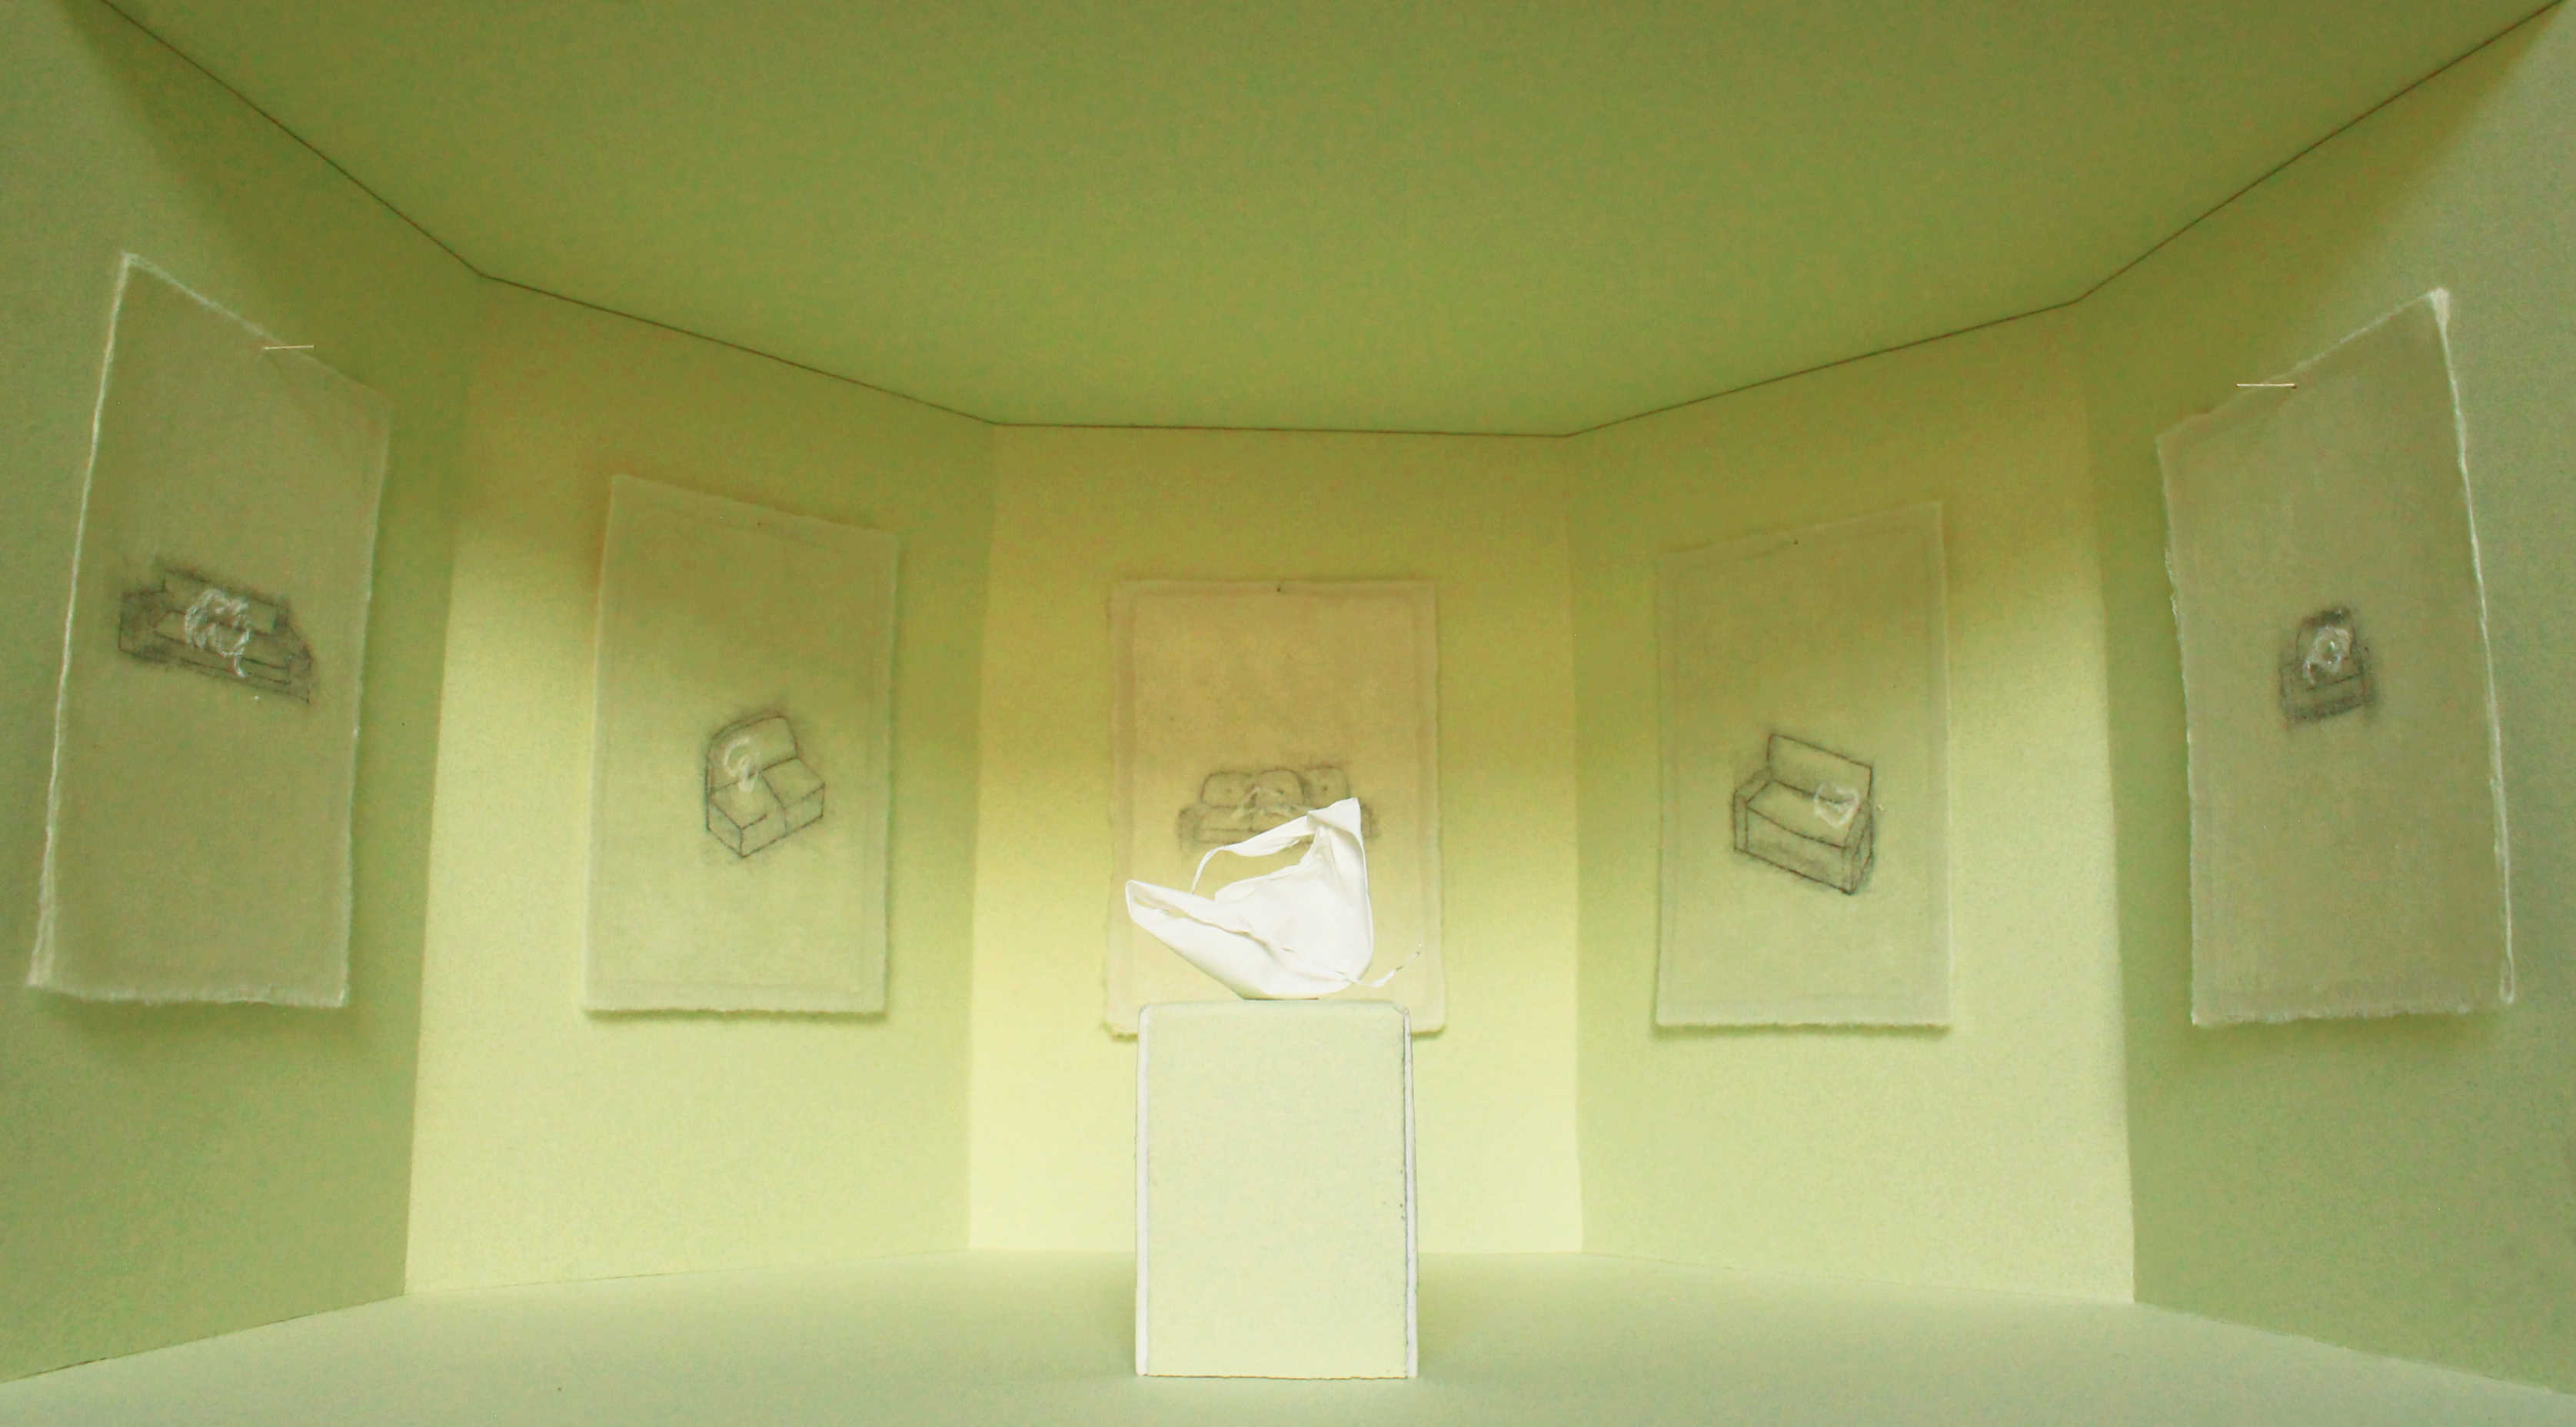 A white egg skin is sat on a green plinth, surrounded by drawings on green washi paper installed in a green room. 